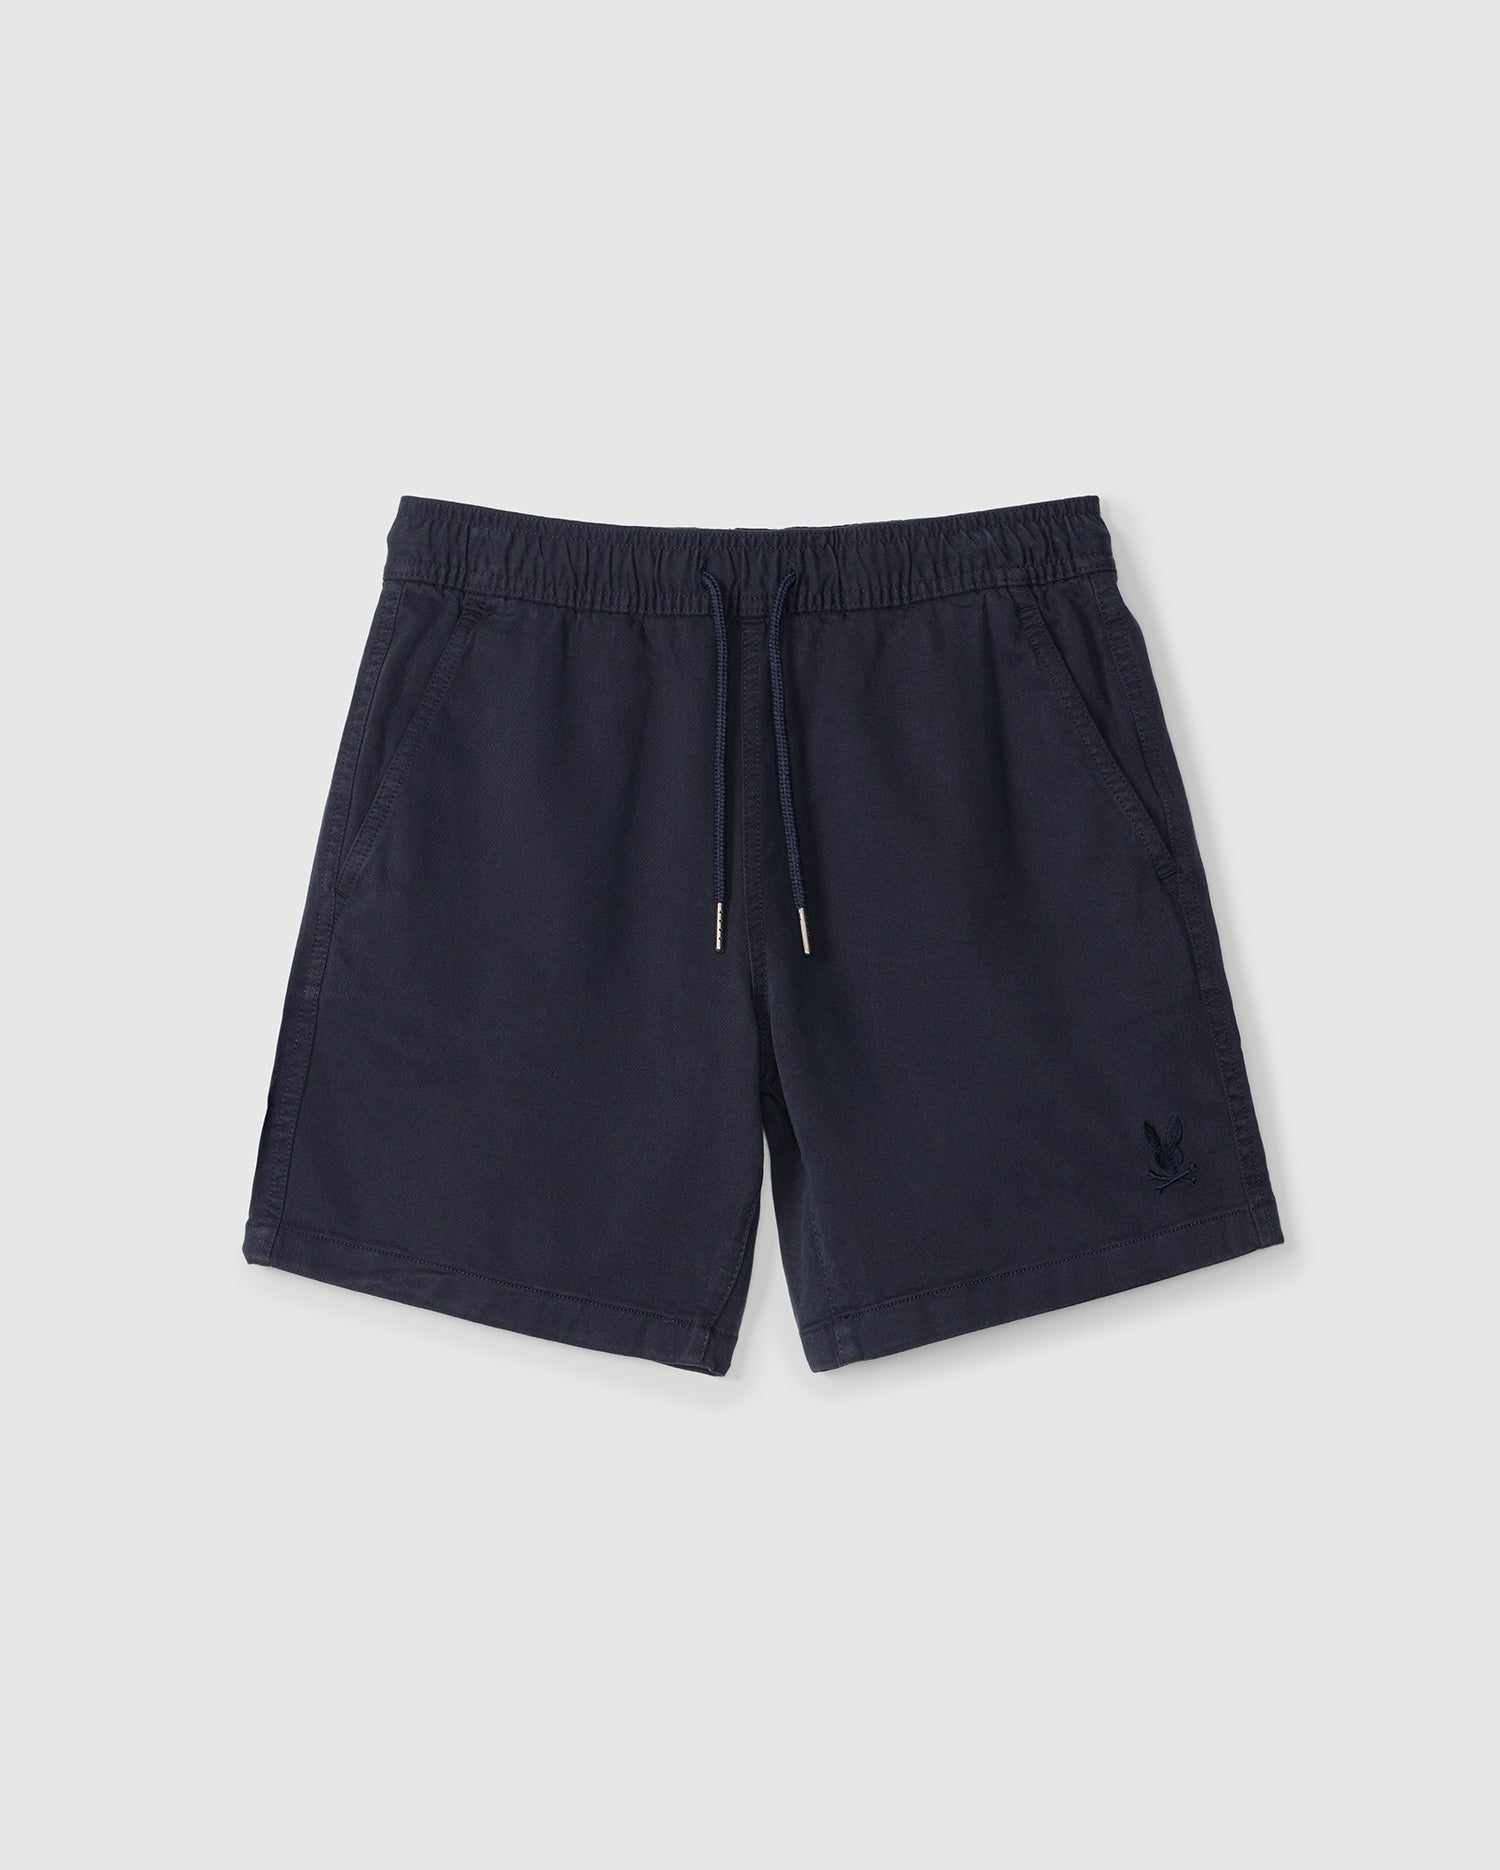 Navy blue Psycho Bunny kids' Willis Stretch Tencel shorts with an elasticized waistband and drawstring, featuring a small embroidered logo on the left leg, displayed on a plain white background.